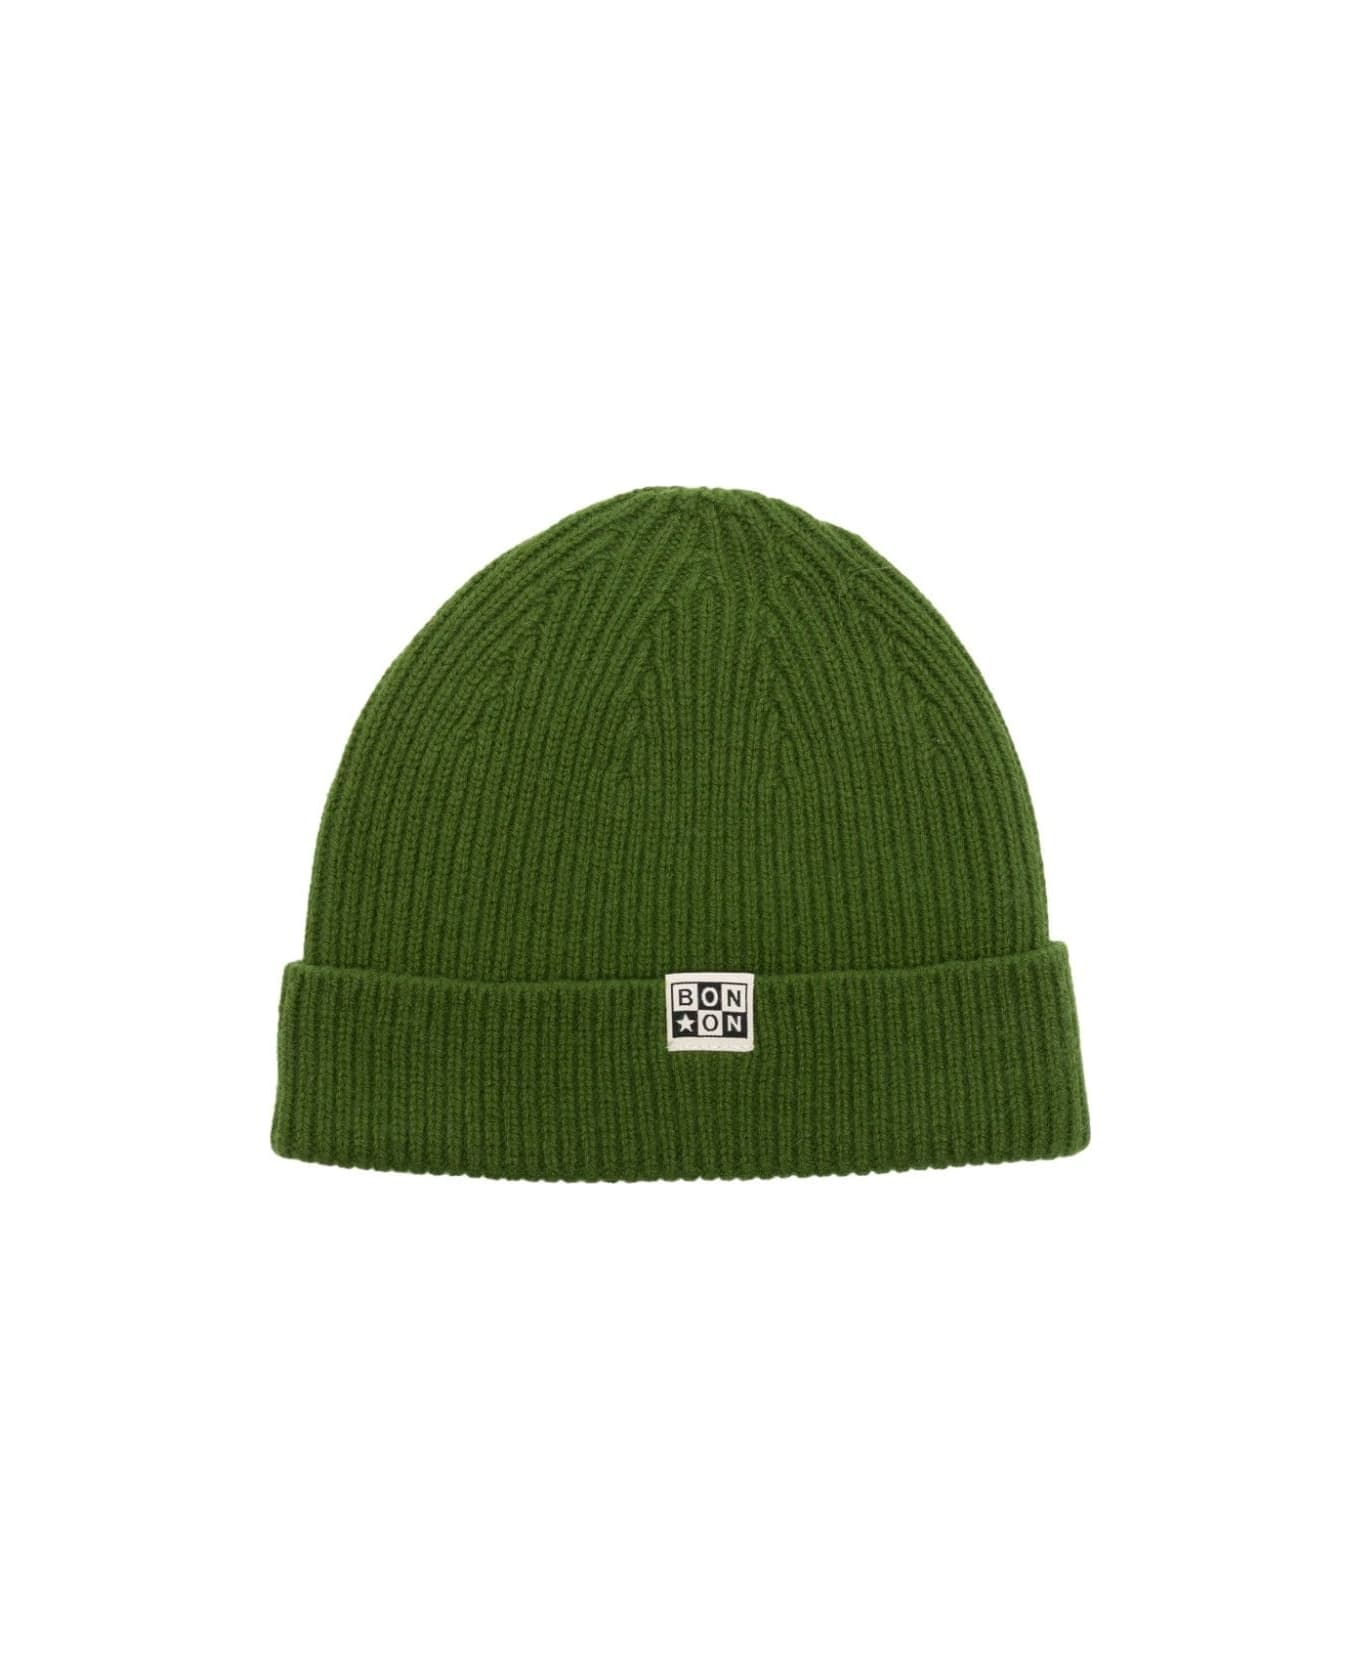 Bonton Ribbed Hat With Patch - Green